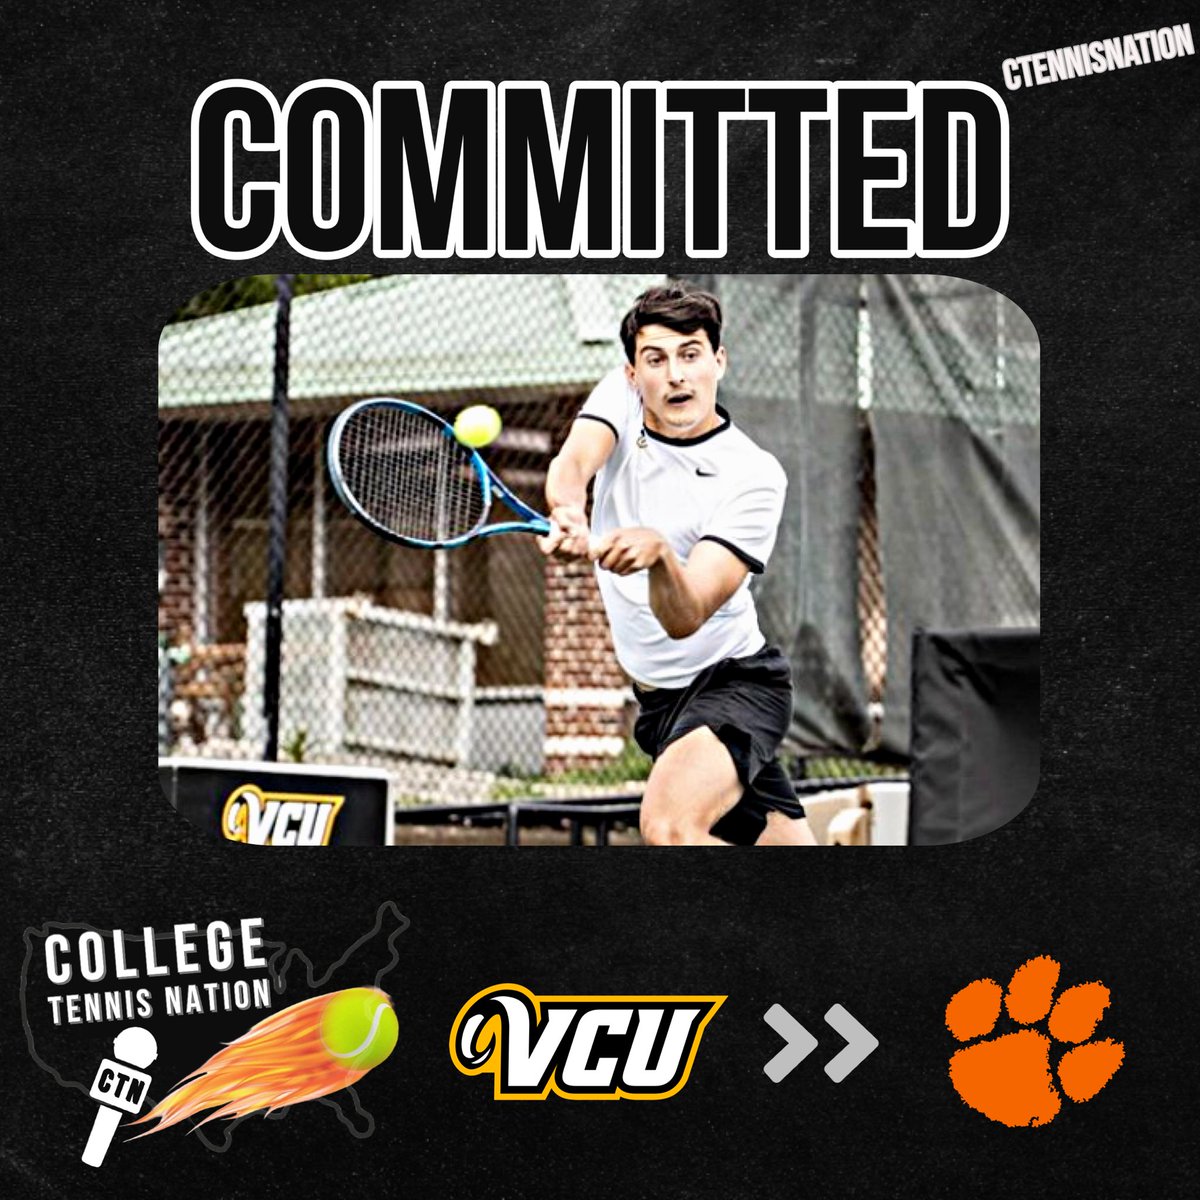 🚨BREAKING: VCU Transfer Romain Gales has committed to Clemson, sources tell CTN. 

Gales played at lines 4 and 5 singles for the Rams, going 17-5 in dual matches this spring. (12.82 UTR)